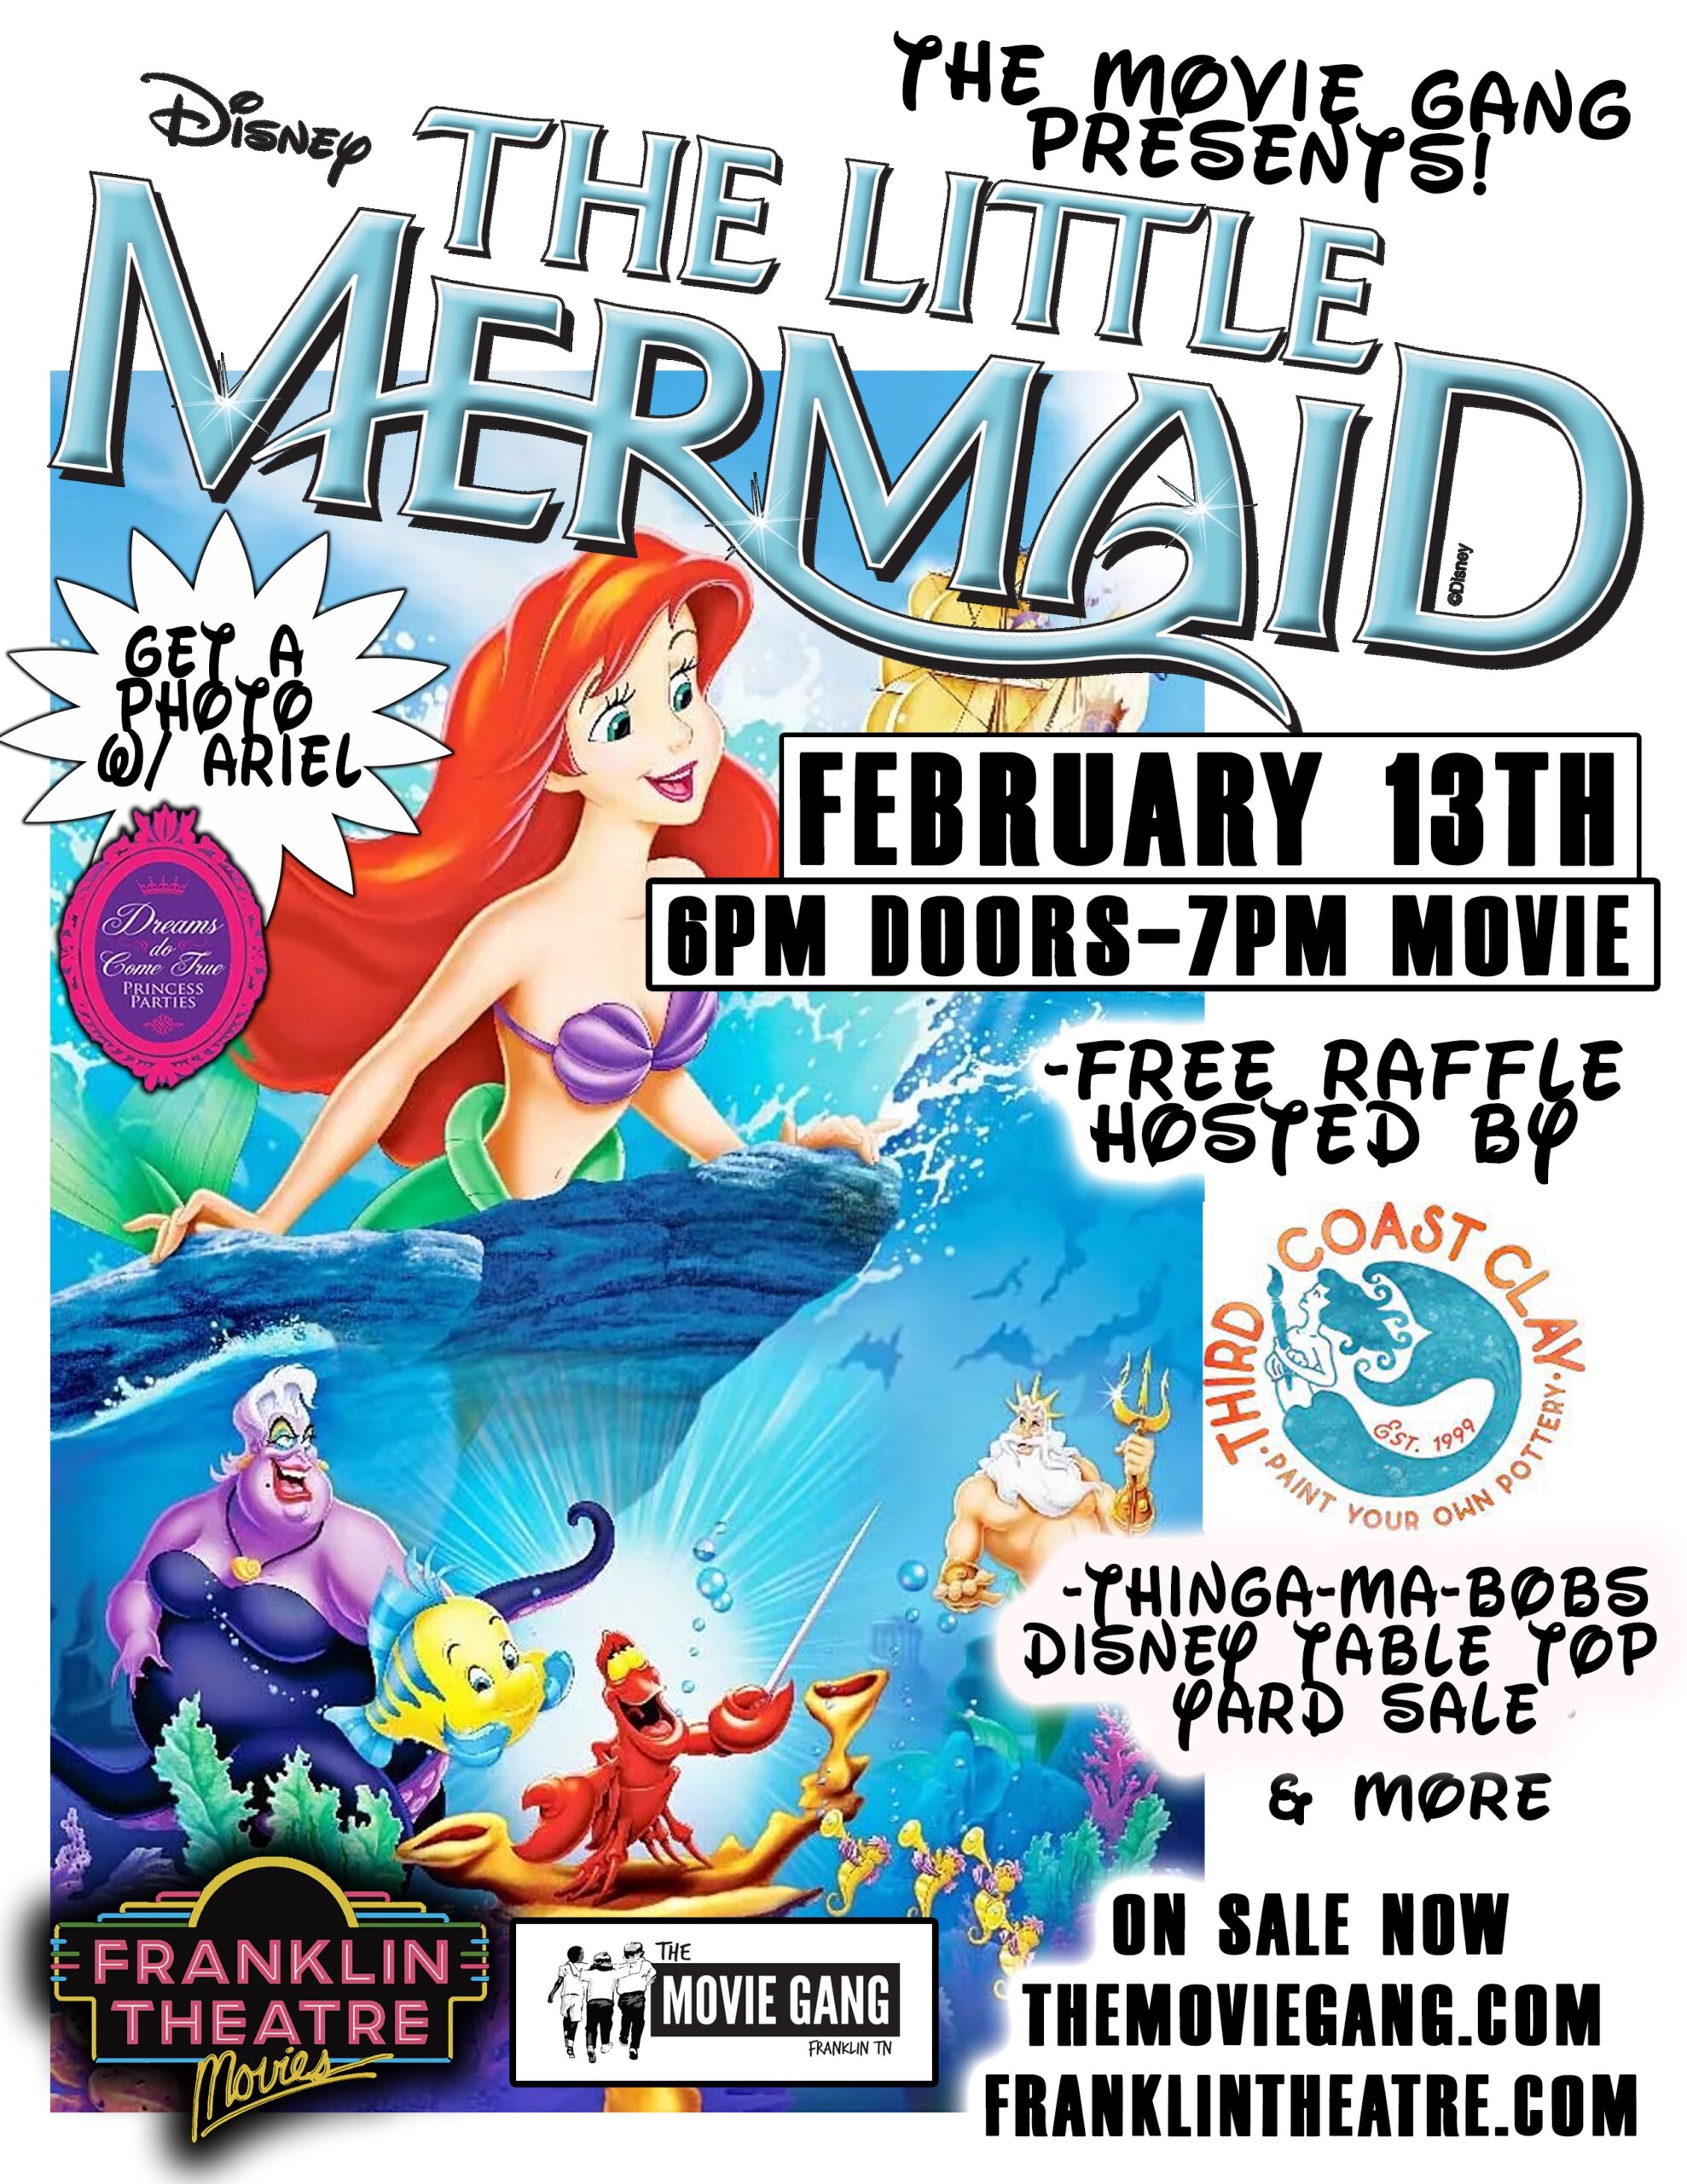 The Movie Gang Presents- The Little Mermaid Downtown Franklin Theatre